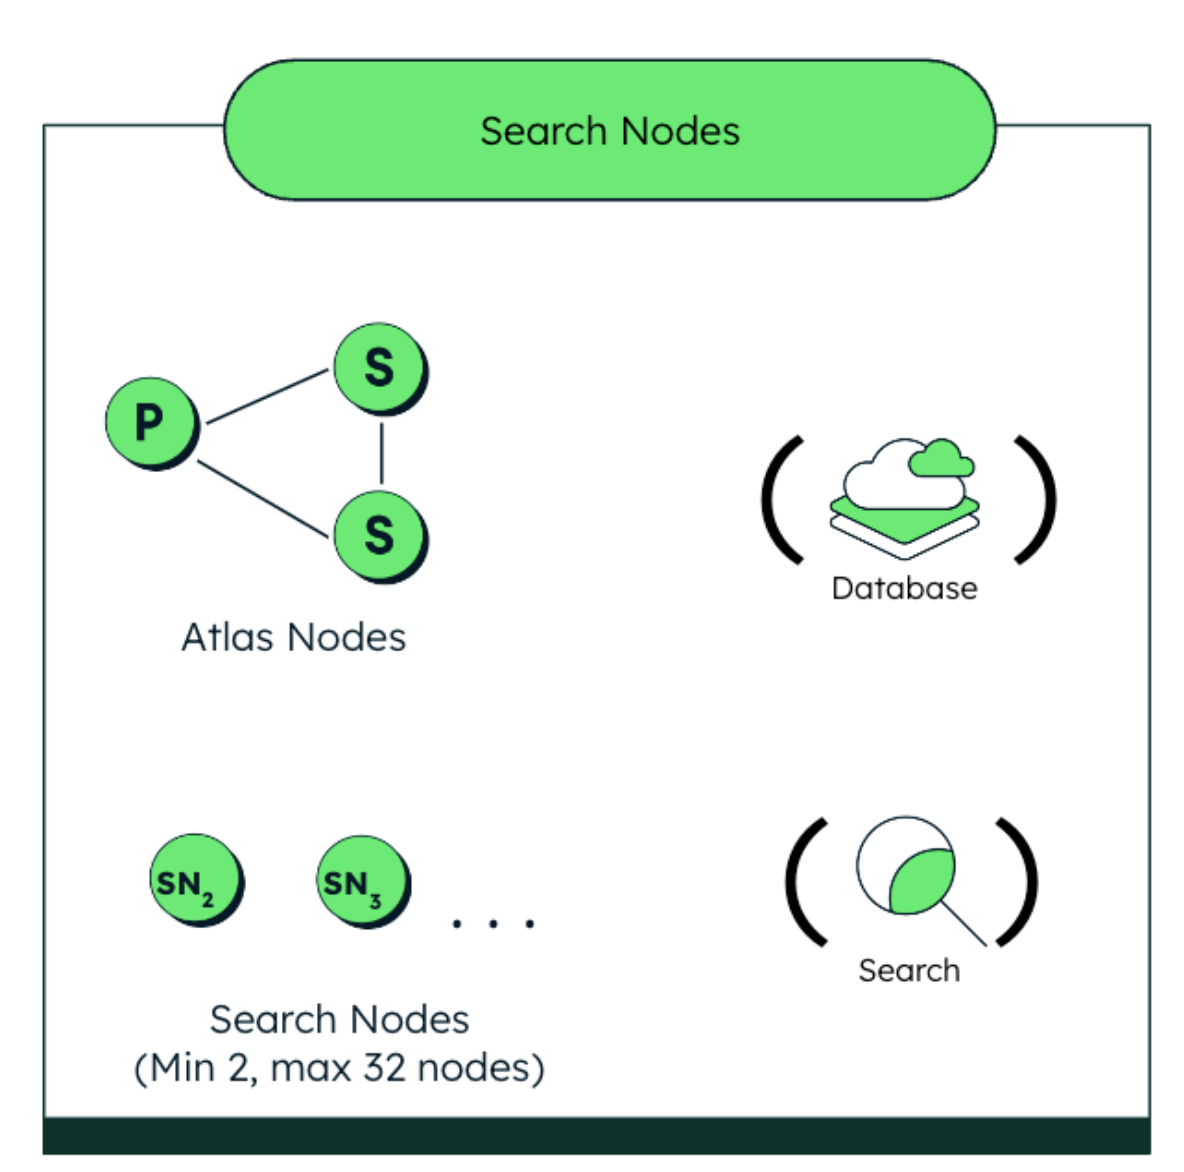 Graphic of Search Nodes Search and Database structure, where Atlas Nodes is the Database and Search Nodes are the Search function.